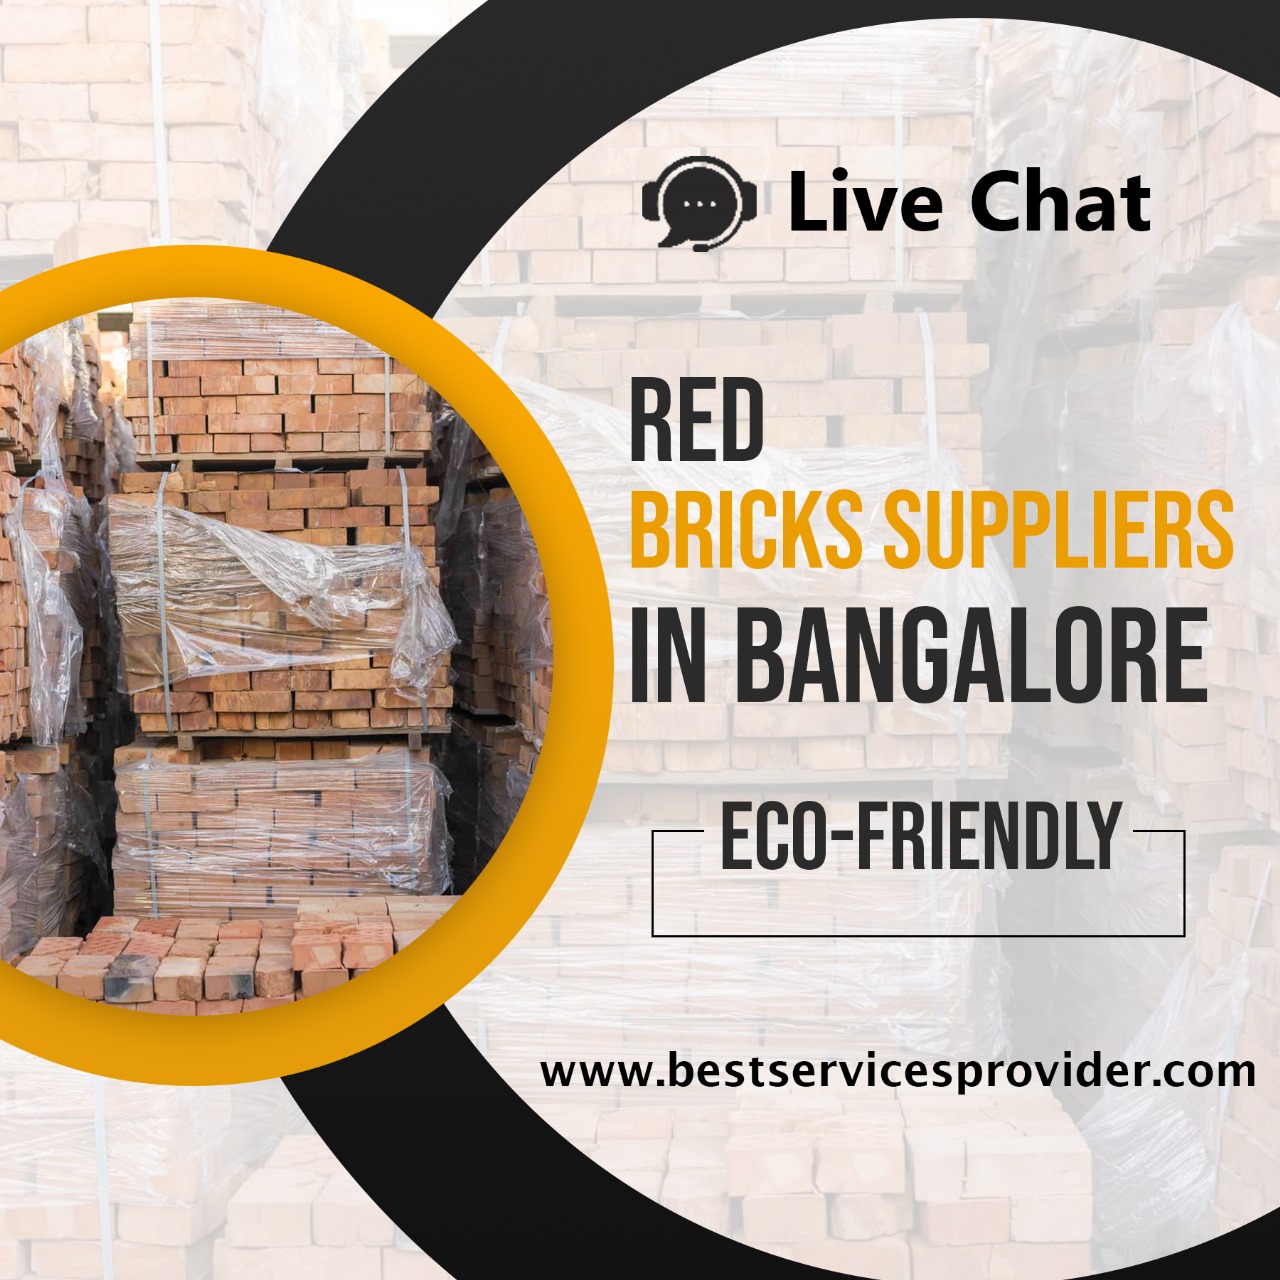 Red Bricks Suppliers In Bangalore